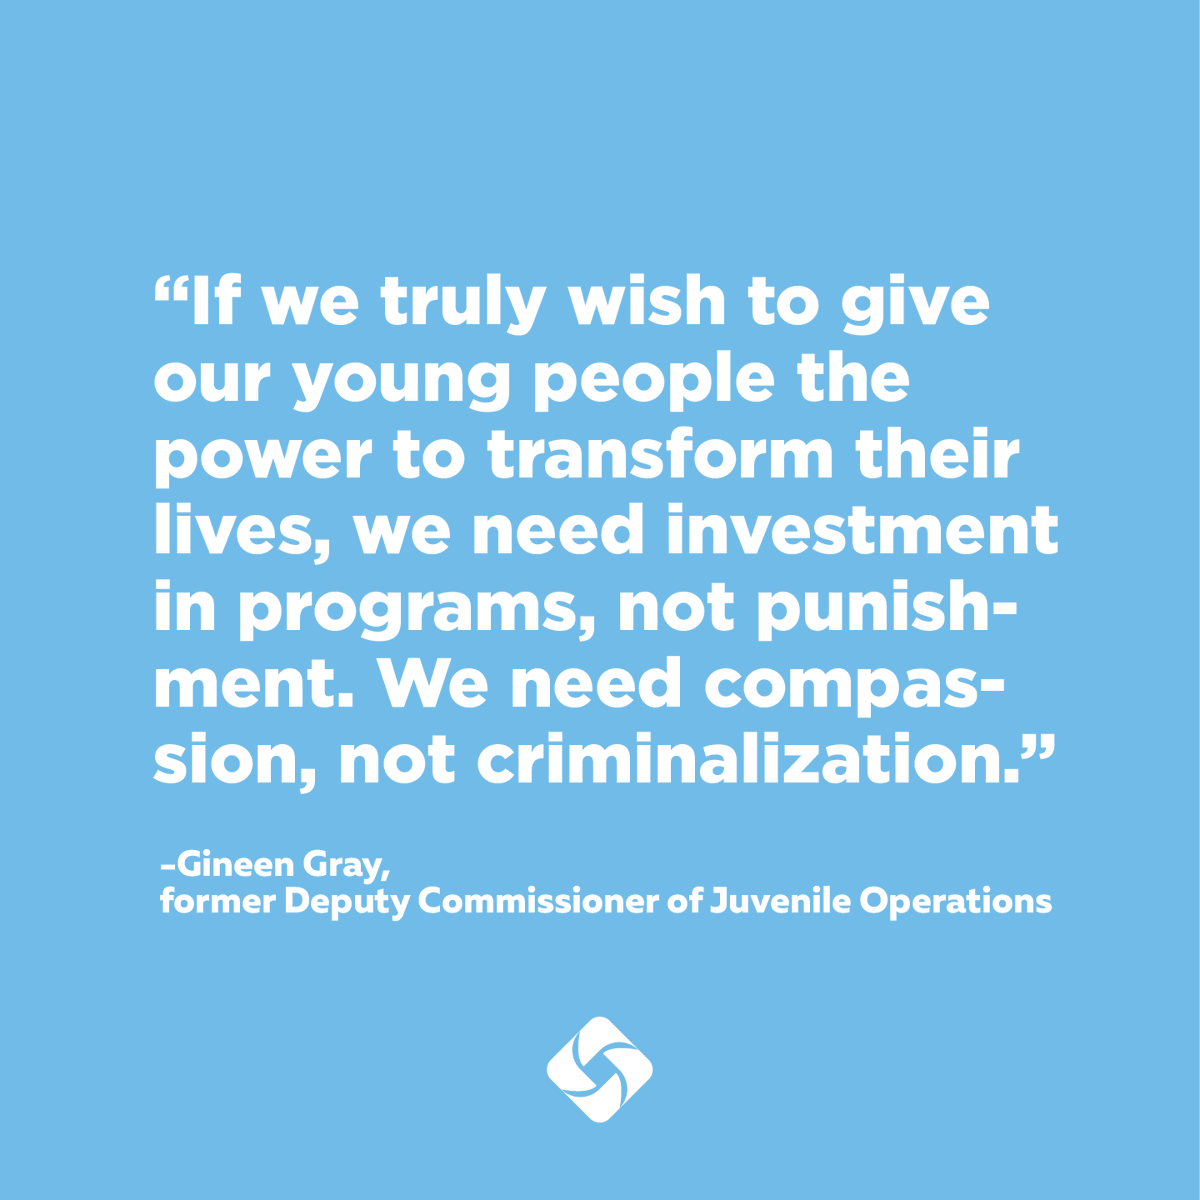 Recidivism rates drastically plummet with alternatives to incarceration. Programs and compassion help both our youth and our criminal legal system.